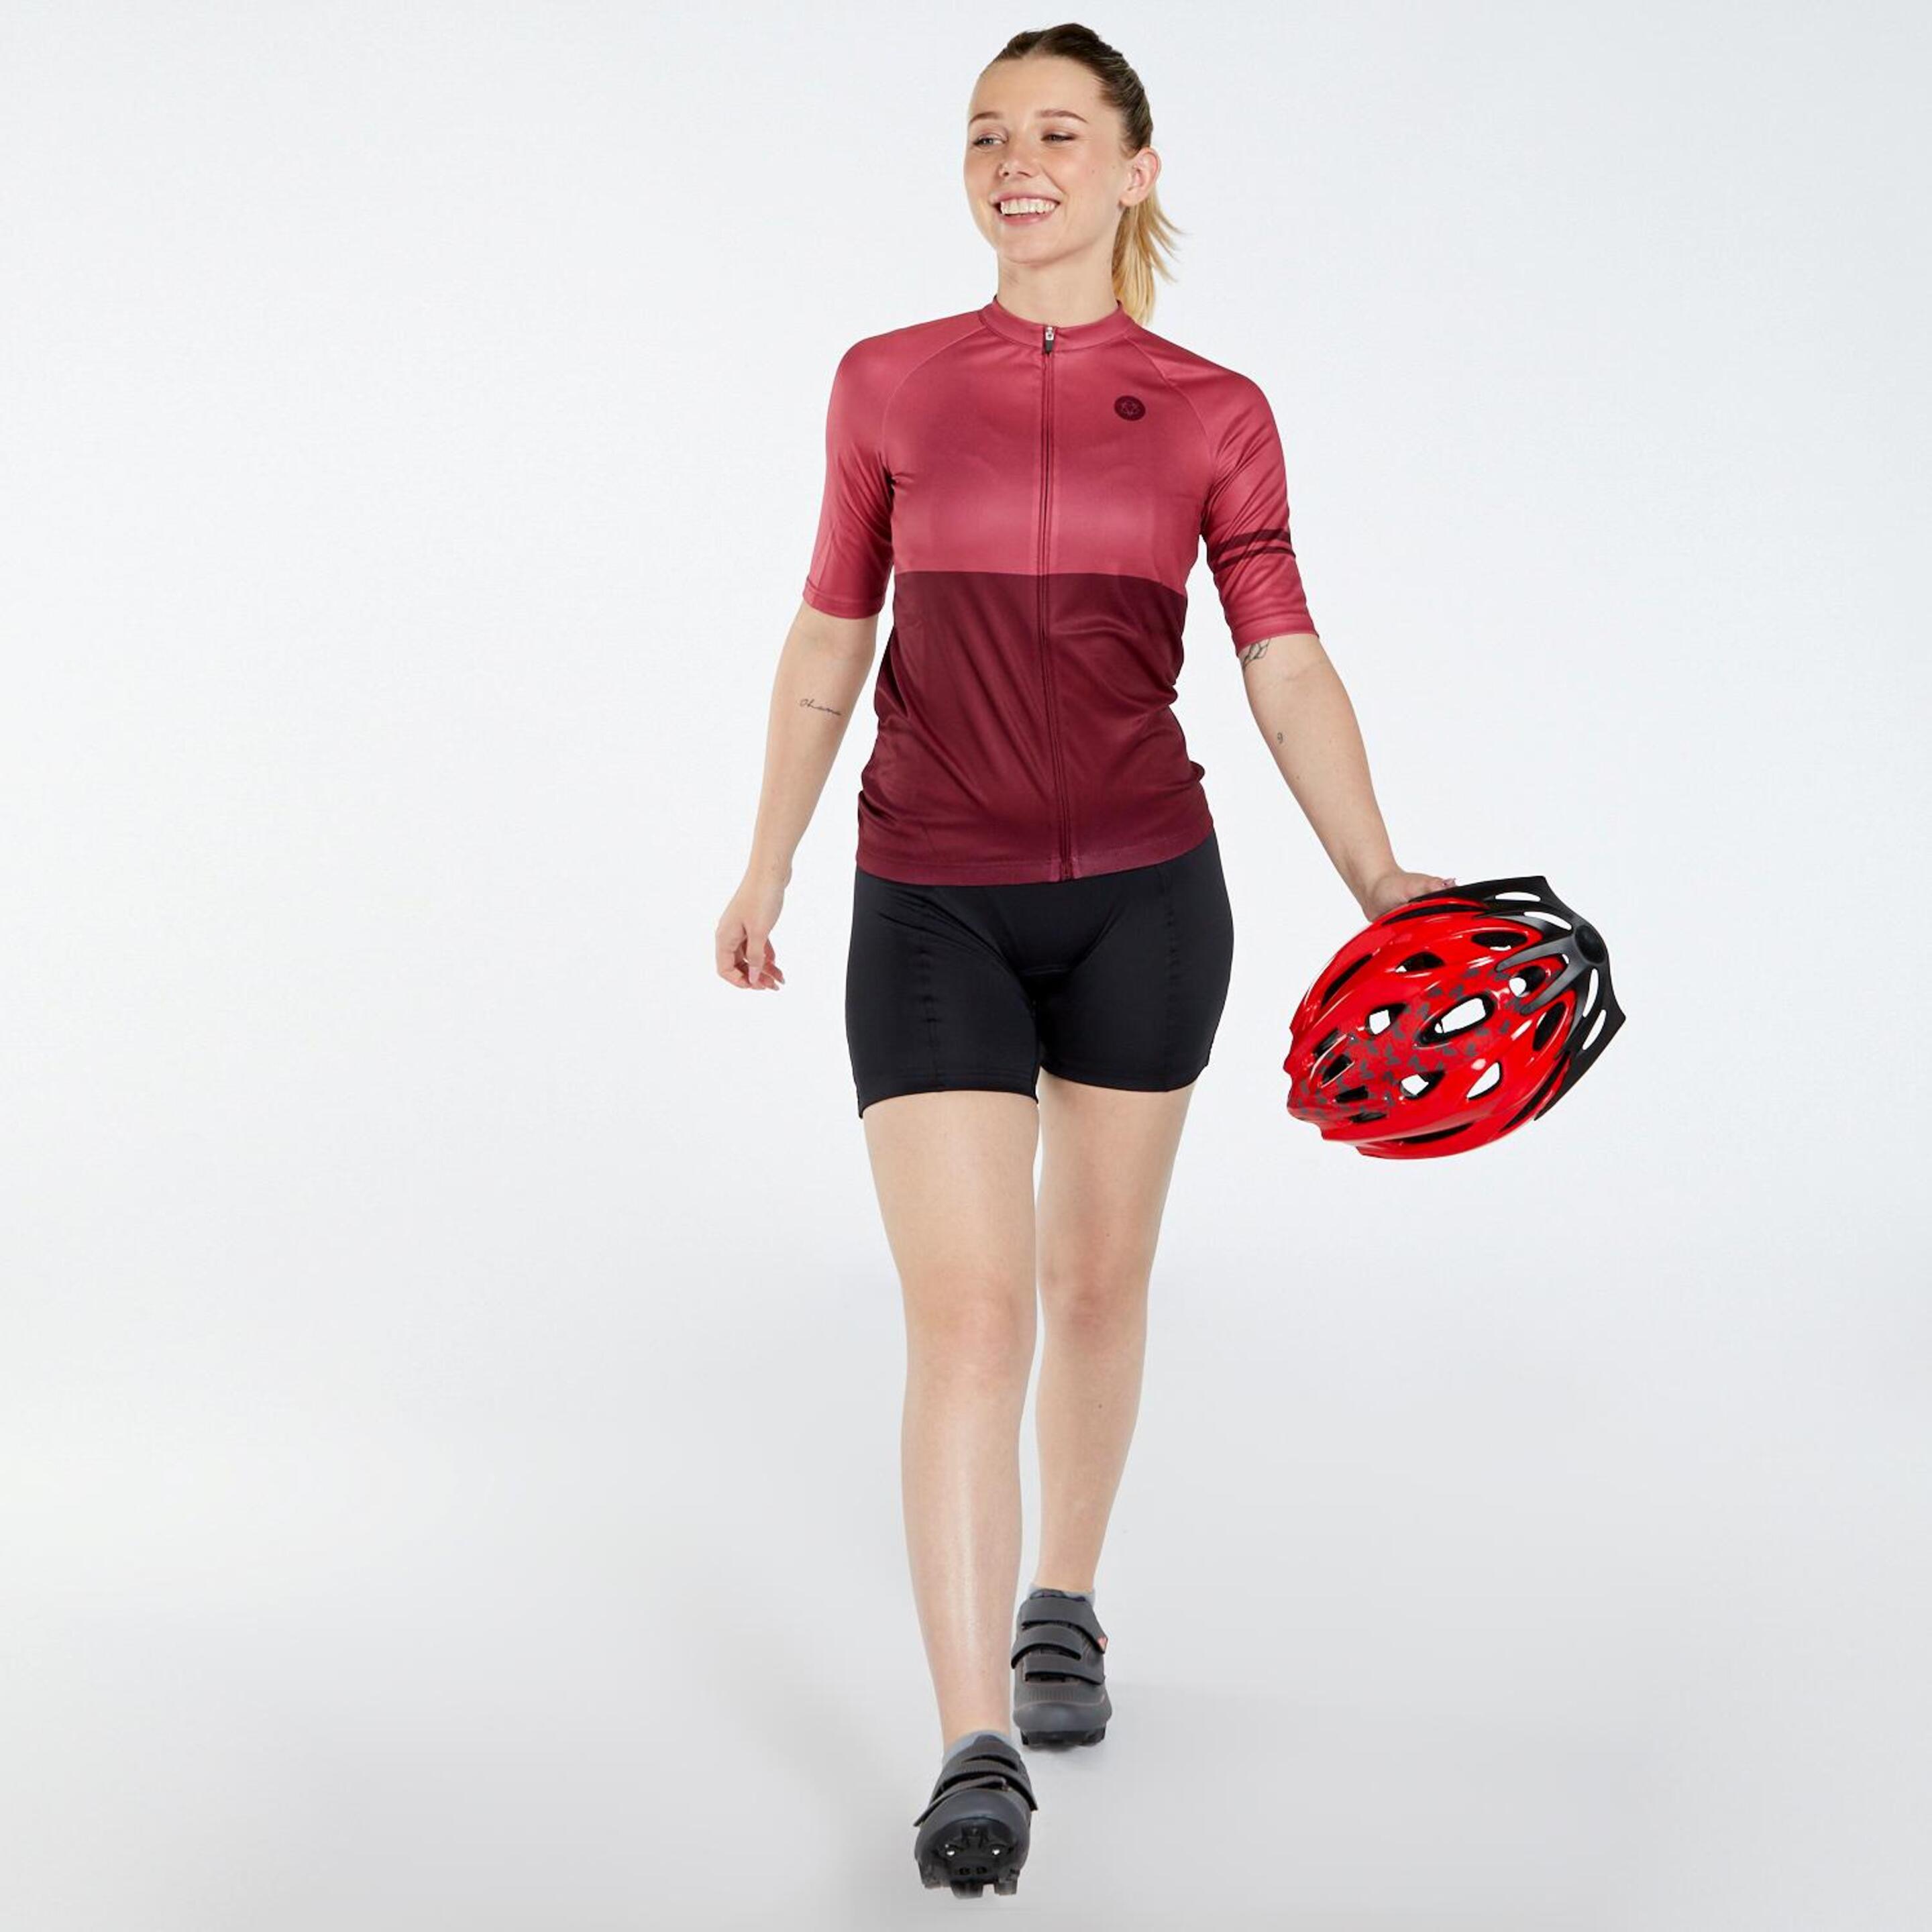 Agu Duo Essential - Rosa - Maillot Ciclismo Mujer